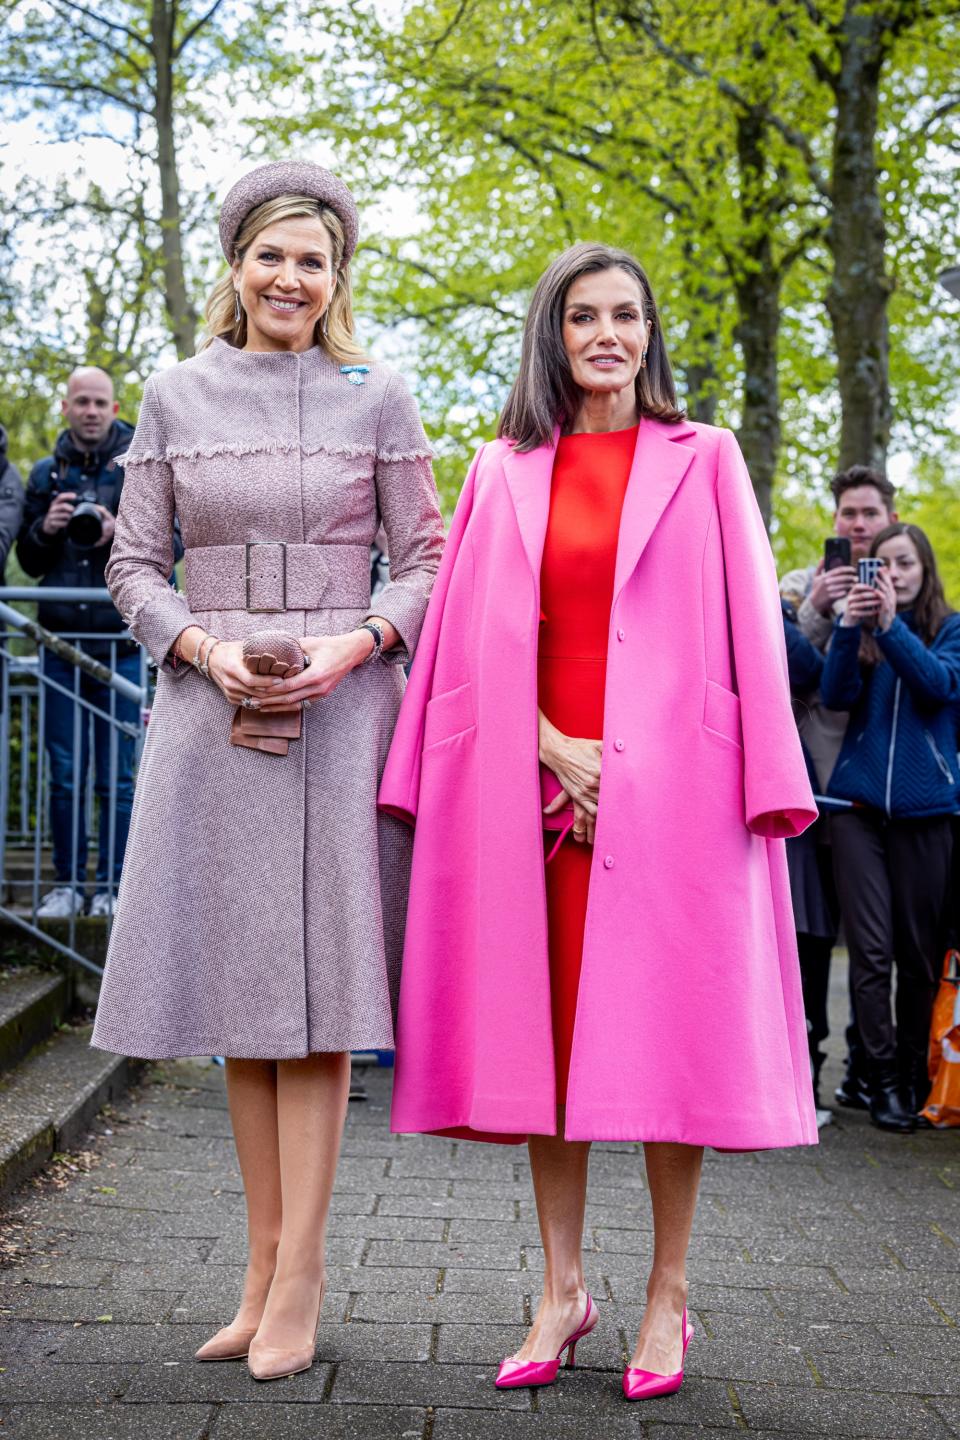 Queen Maxima of The Netherlands and Queen Letizia of Spain visit Lab6 that supports mental health for young people on April 18 in Amsterdam.